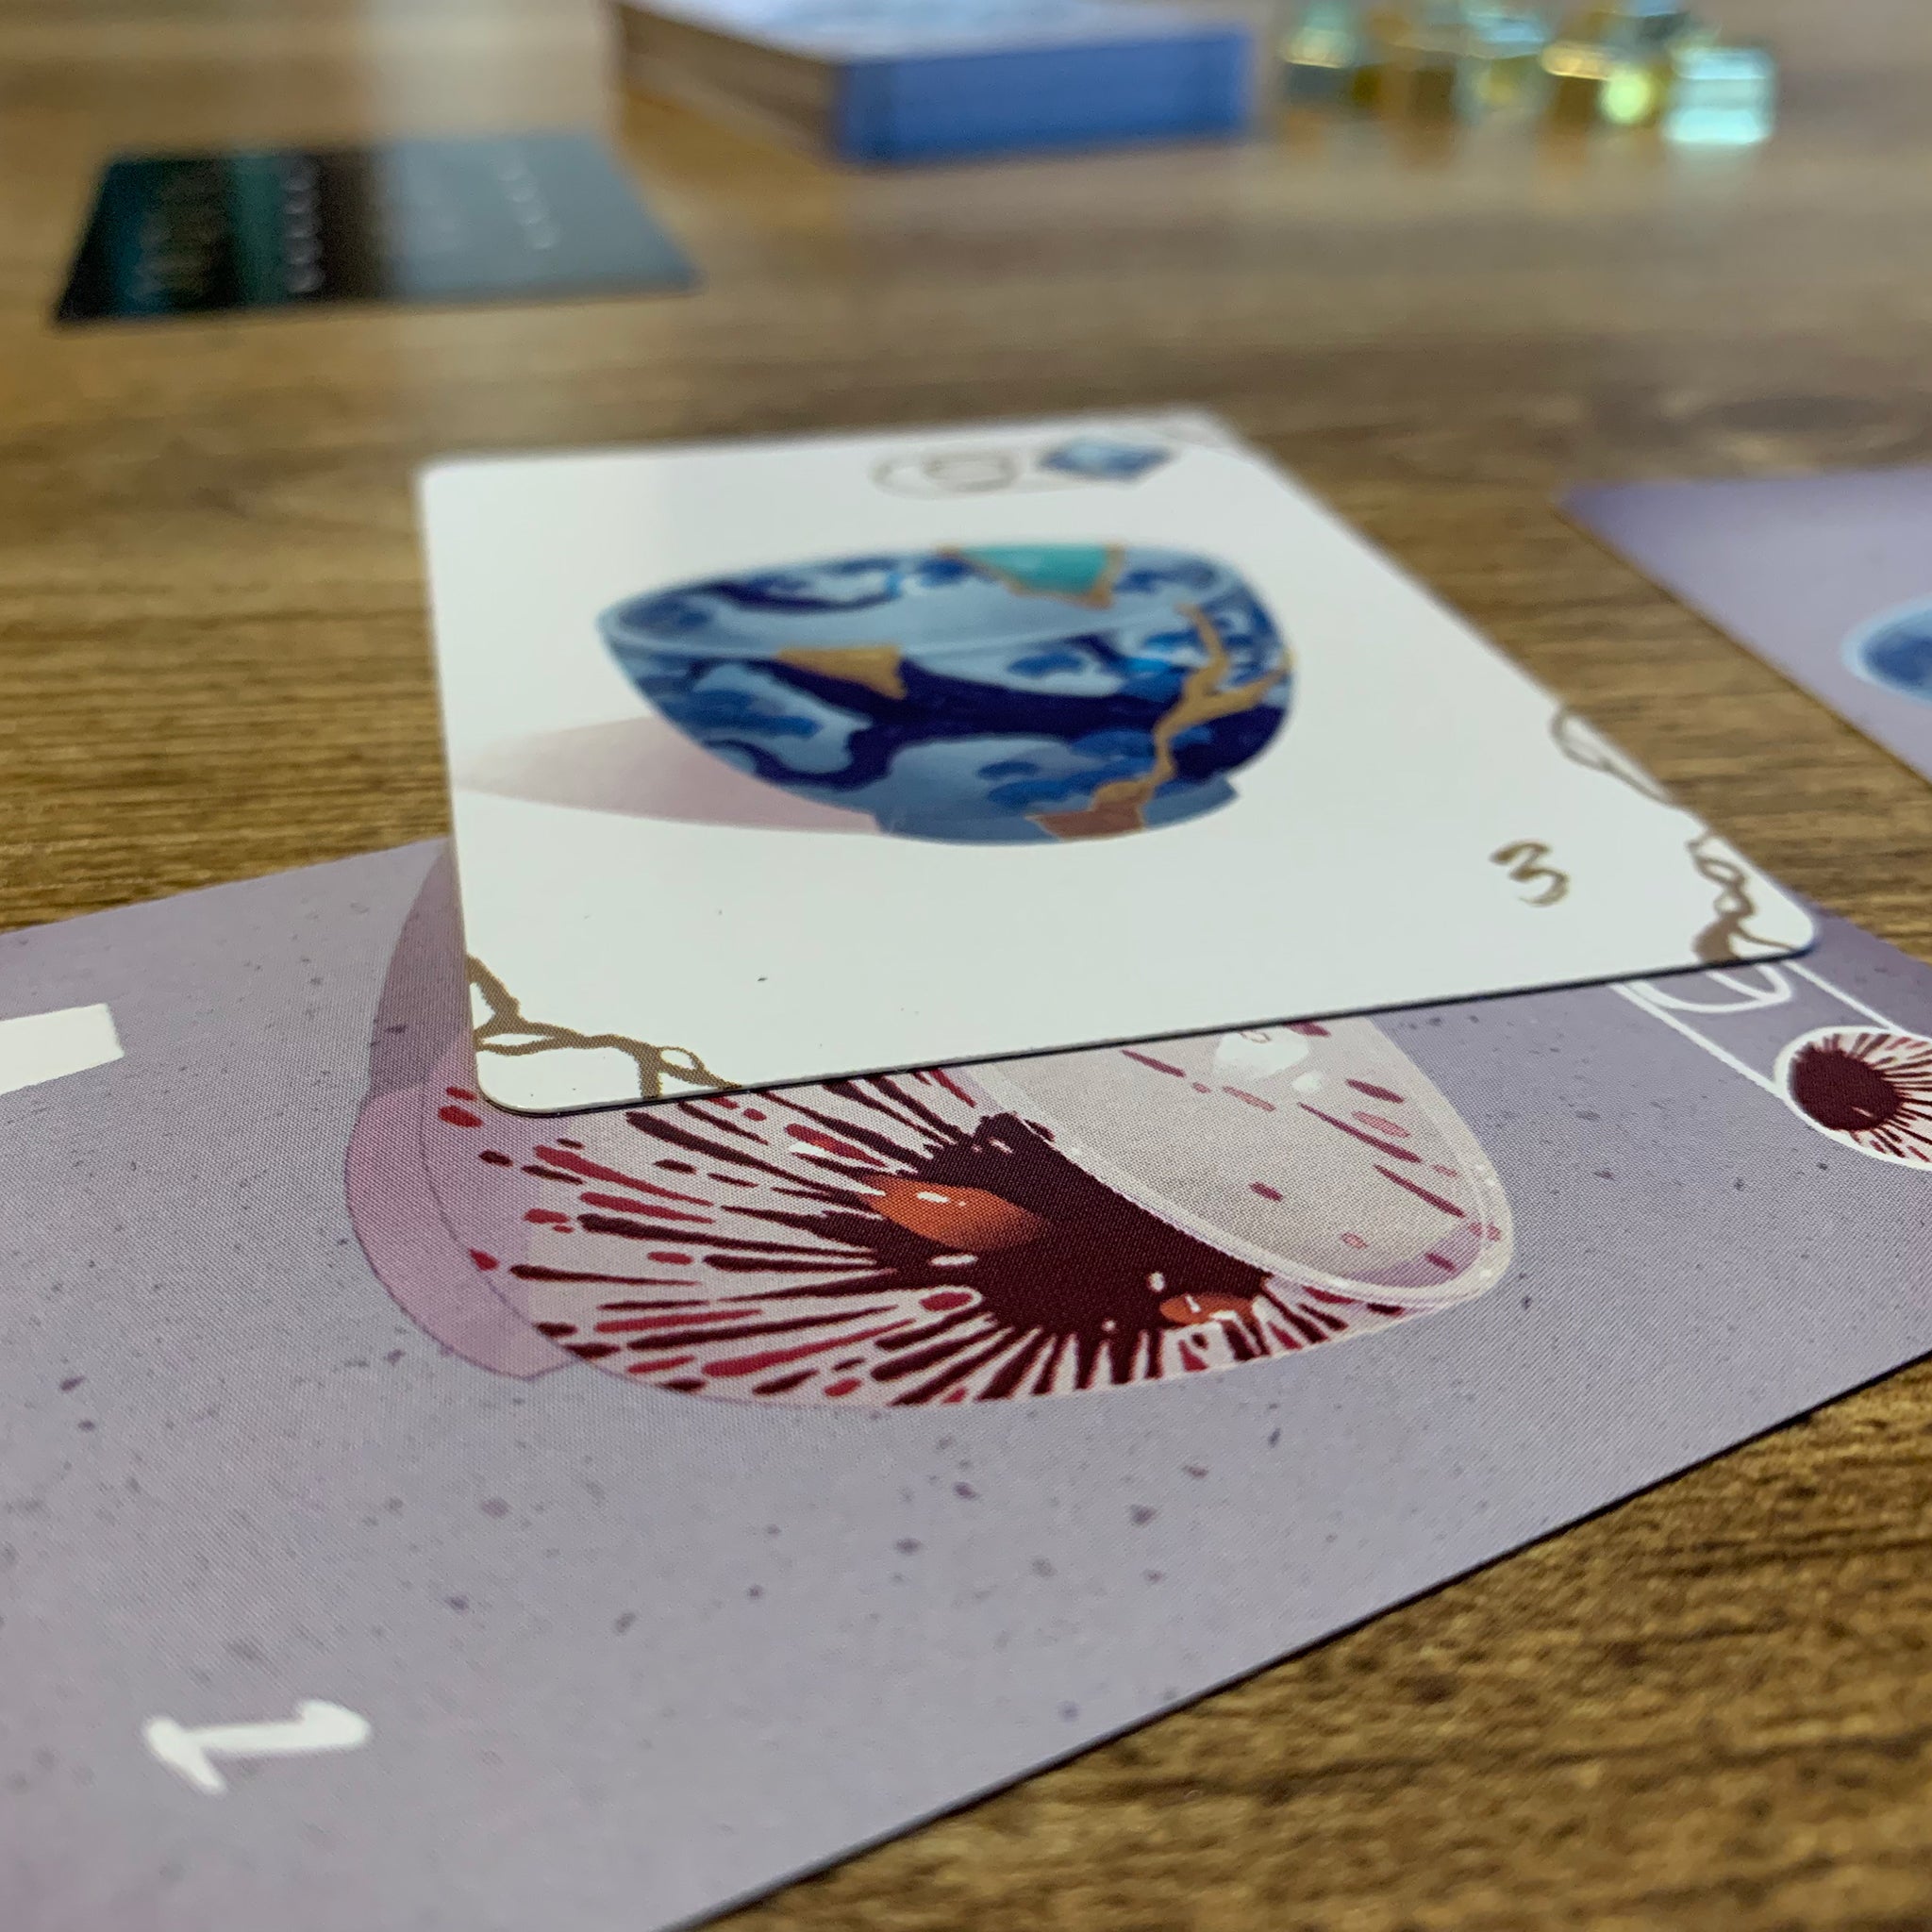 Broken and Beautiful: A Game About Kintsugi - Bards & Cards